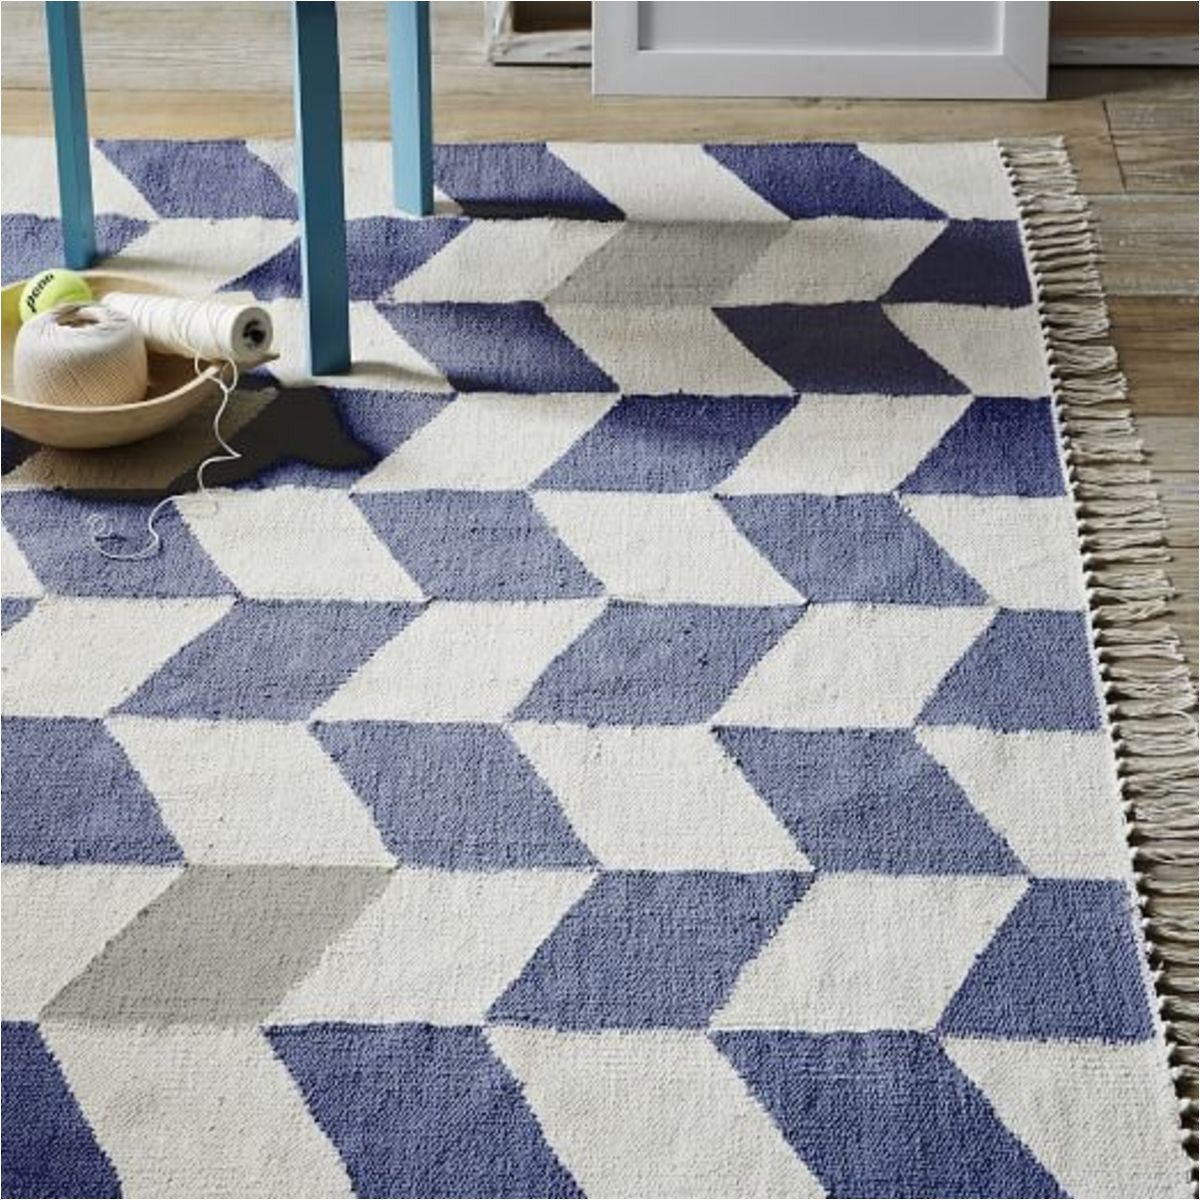 Turn Carpet Into area Rug 9 Fresh Diy Rug Ideas to Breath New Life Into Your Old Floors …